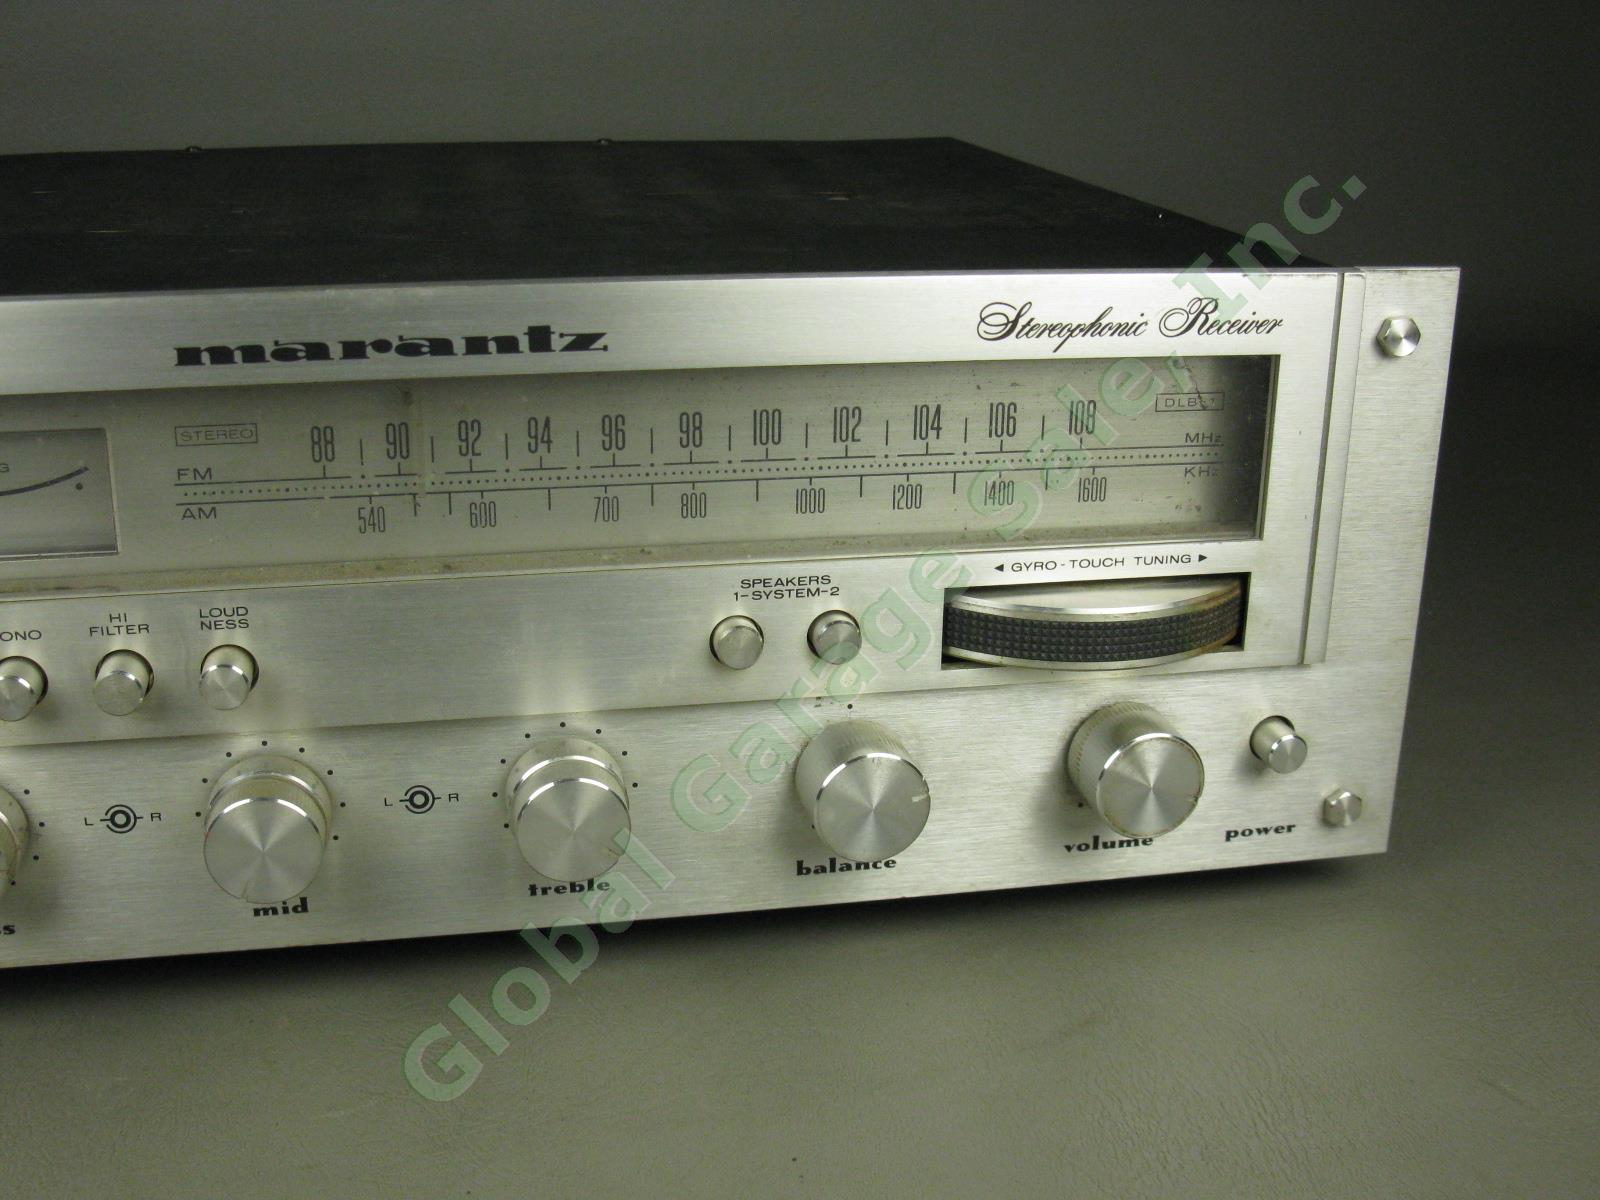 Vtg Marantz 2238B Stereophonic AM/FM Stereo Receiver Integrated Amplifier Preamp 2